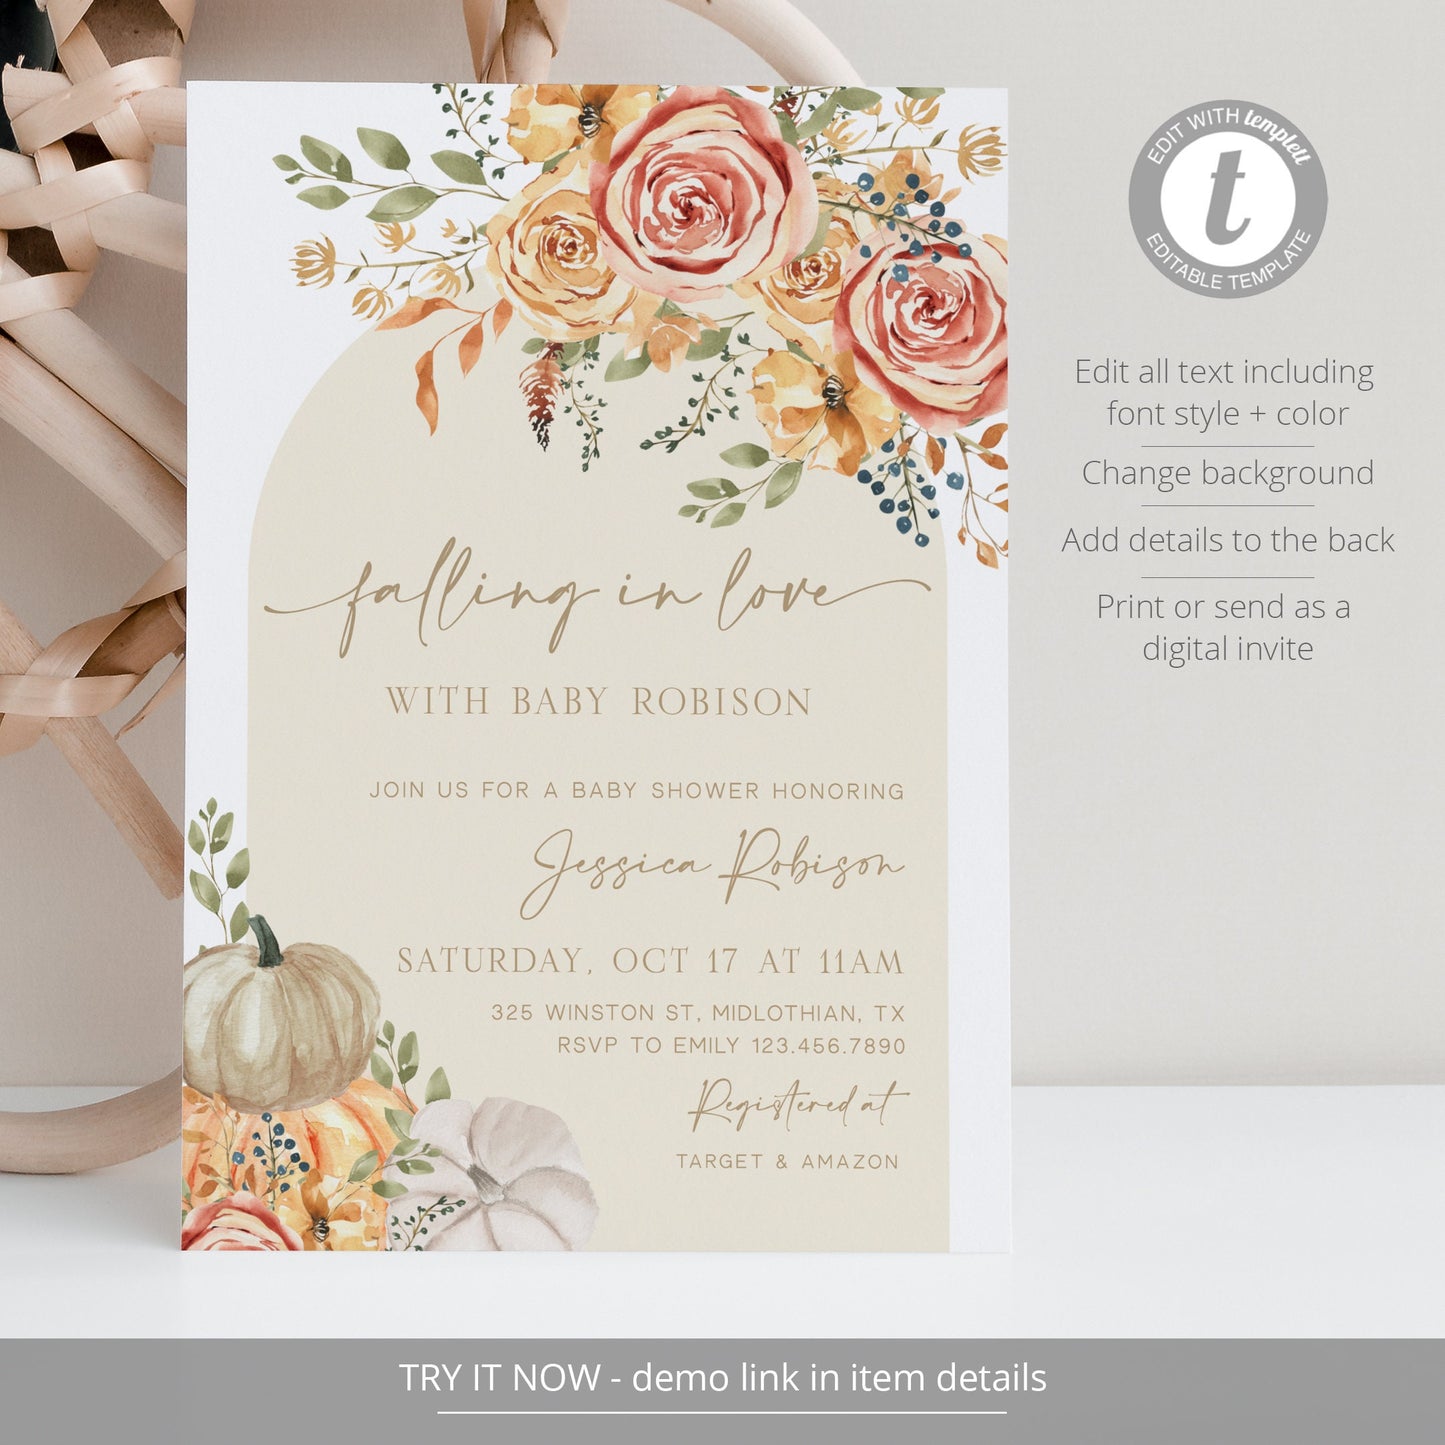 Editable Falling in Love Baby Shower Invitation Boho Pumpkin Baby Shower Fall Floral Baby Shower Invite Template